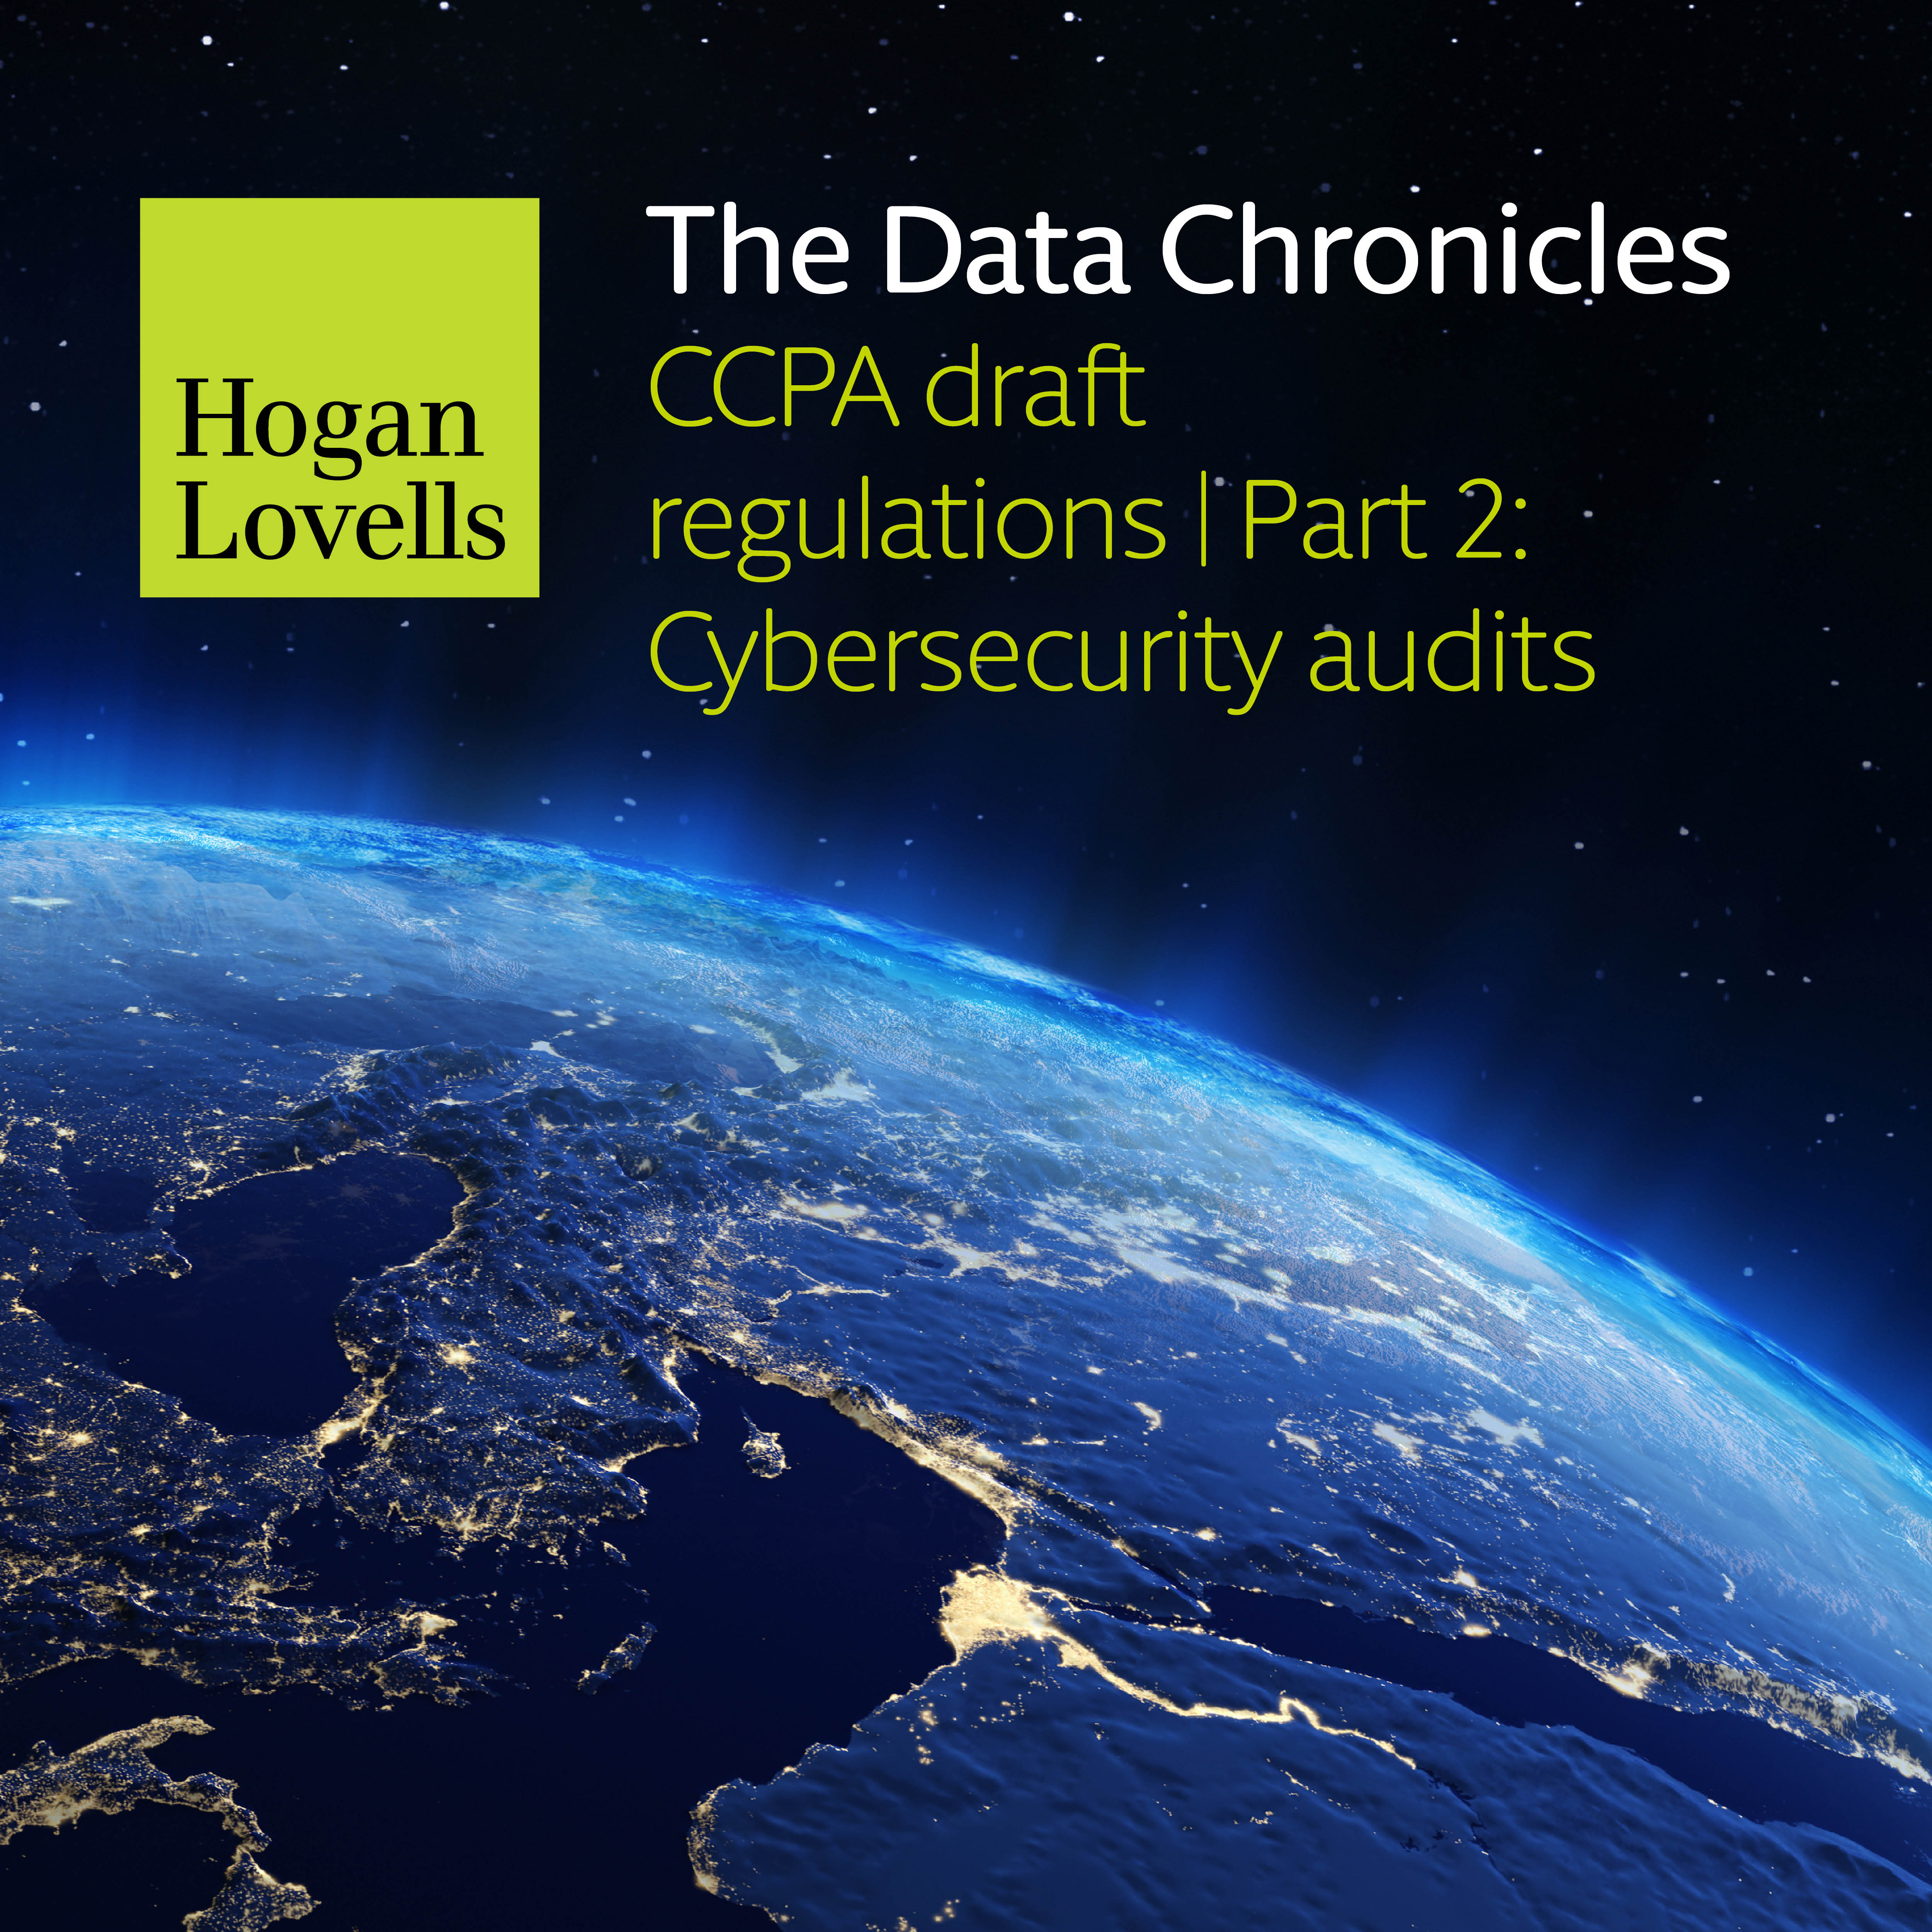 The Data Chronicles_CCPA part 2